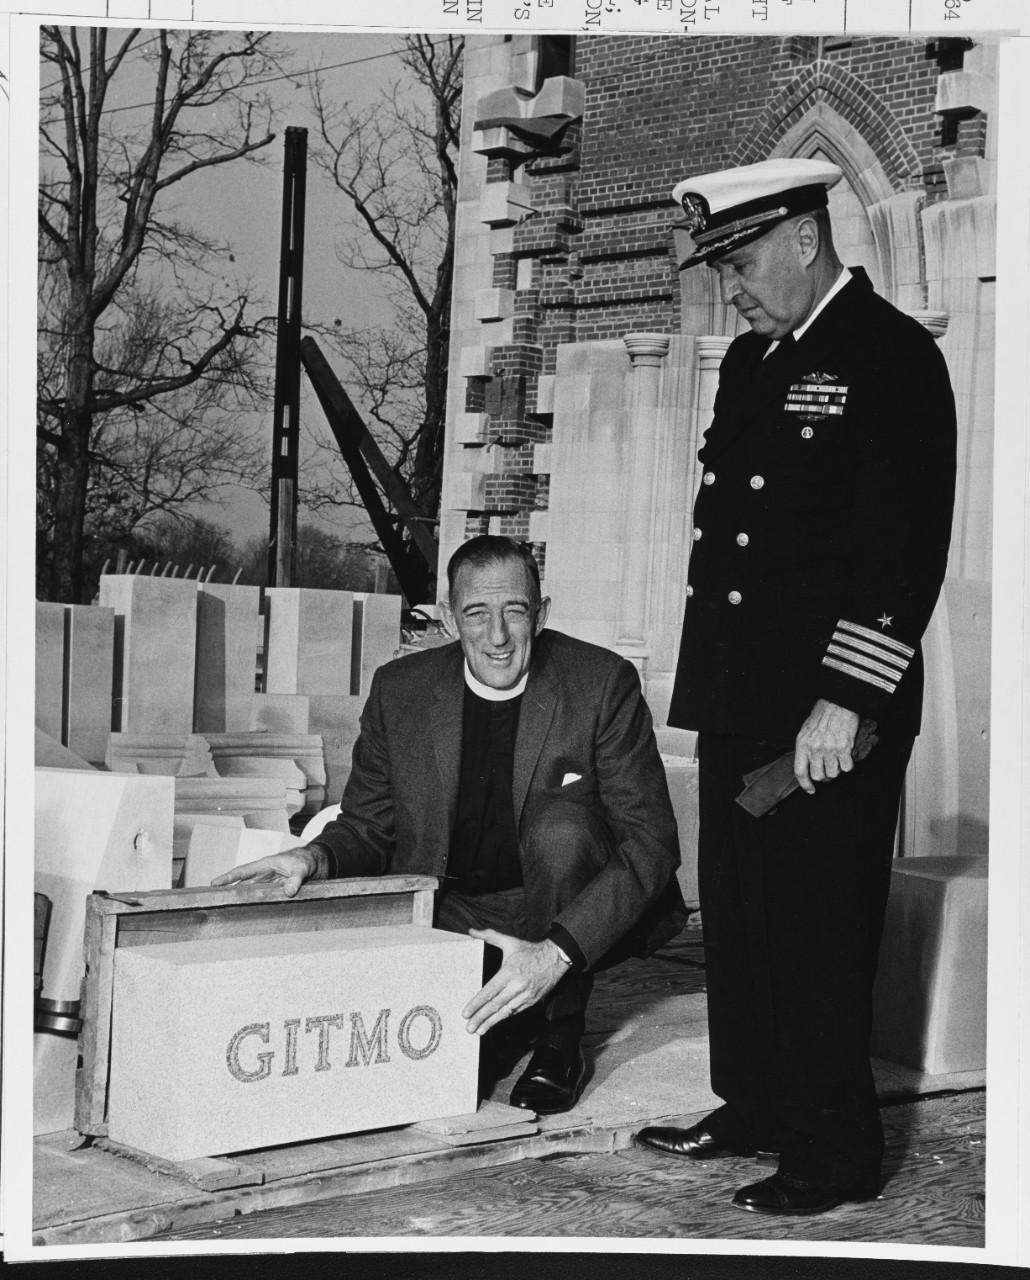 Captain F. Kent Loomis, USN (Ret.) and the Right Reverend Francis B. Sayre, Jr. Reconstruction of Washington National Cathedral